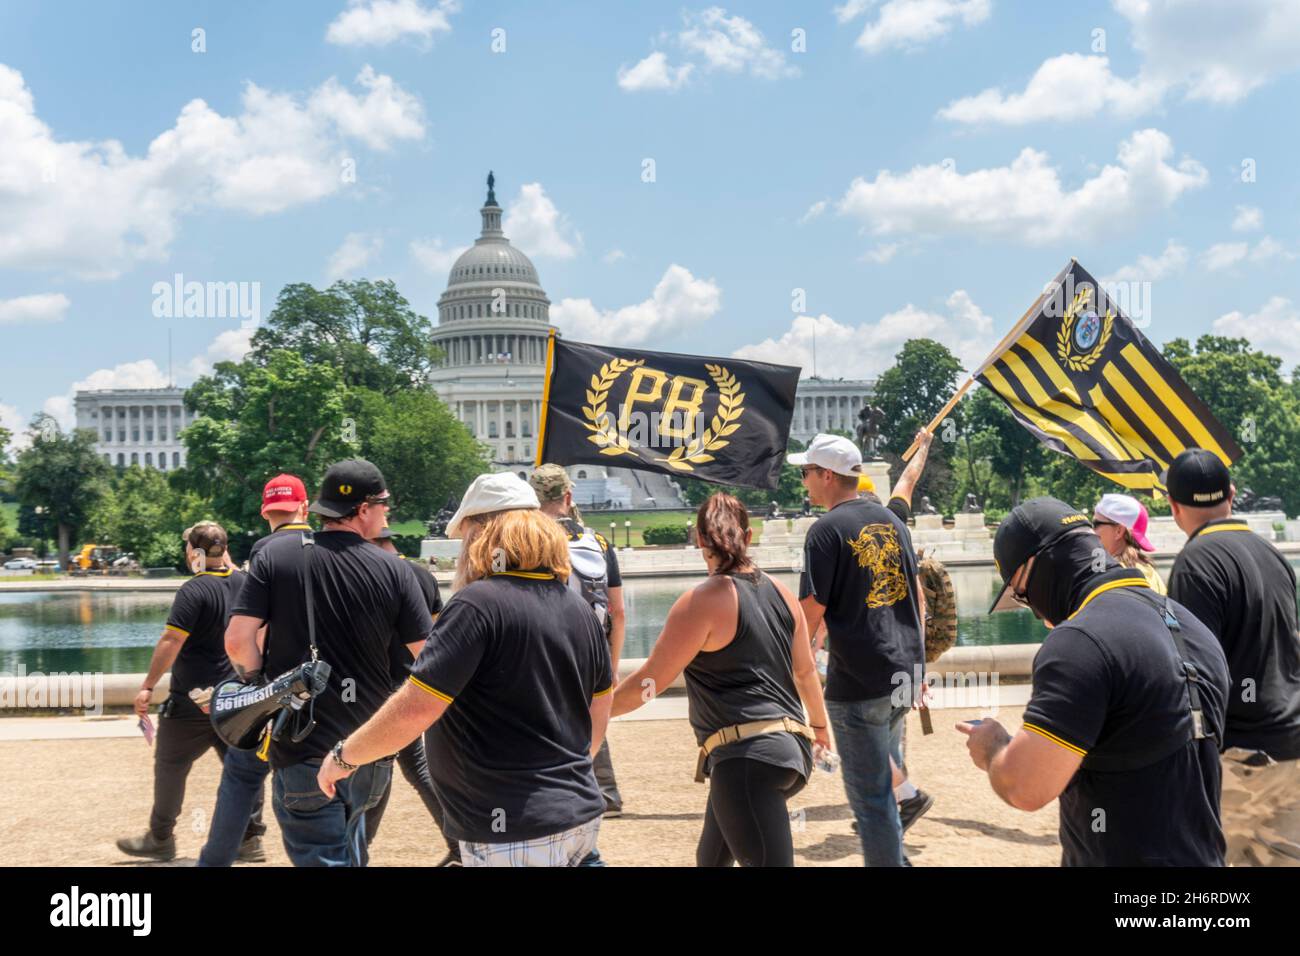 A group of Proud Boys and Trump supporters march to the US Capitol building in Washington DC on 4th July, 2020. Credit: Rise Images/Alamy Stock Photo